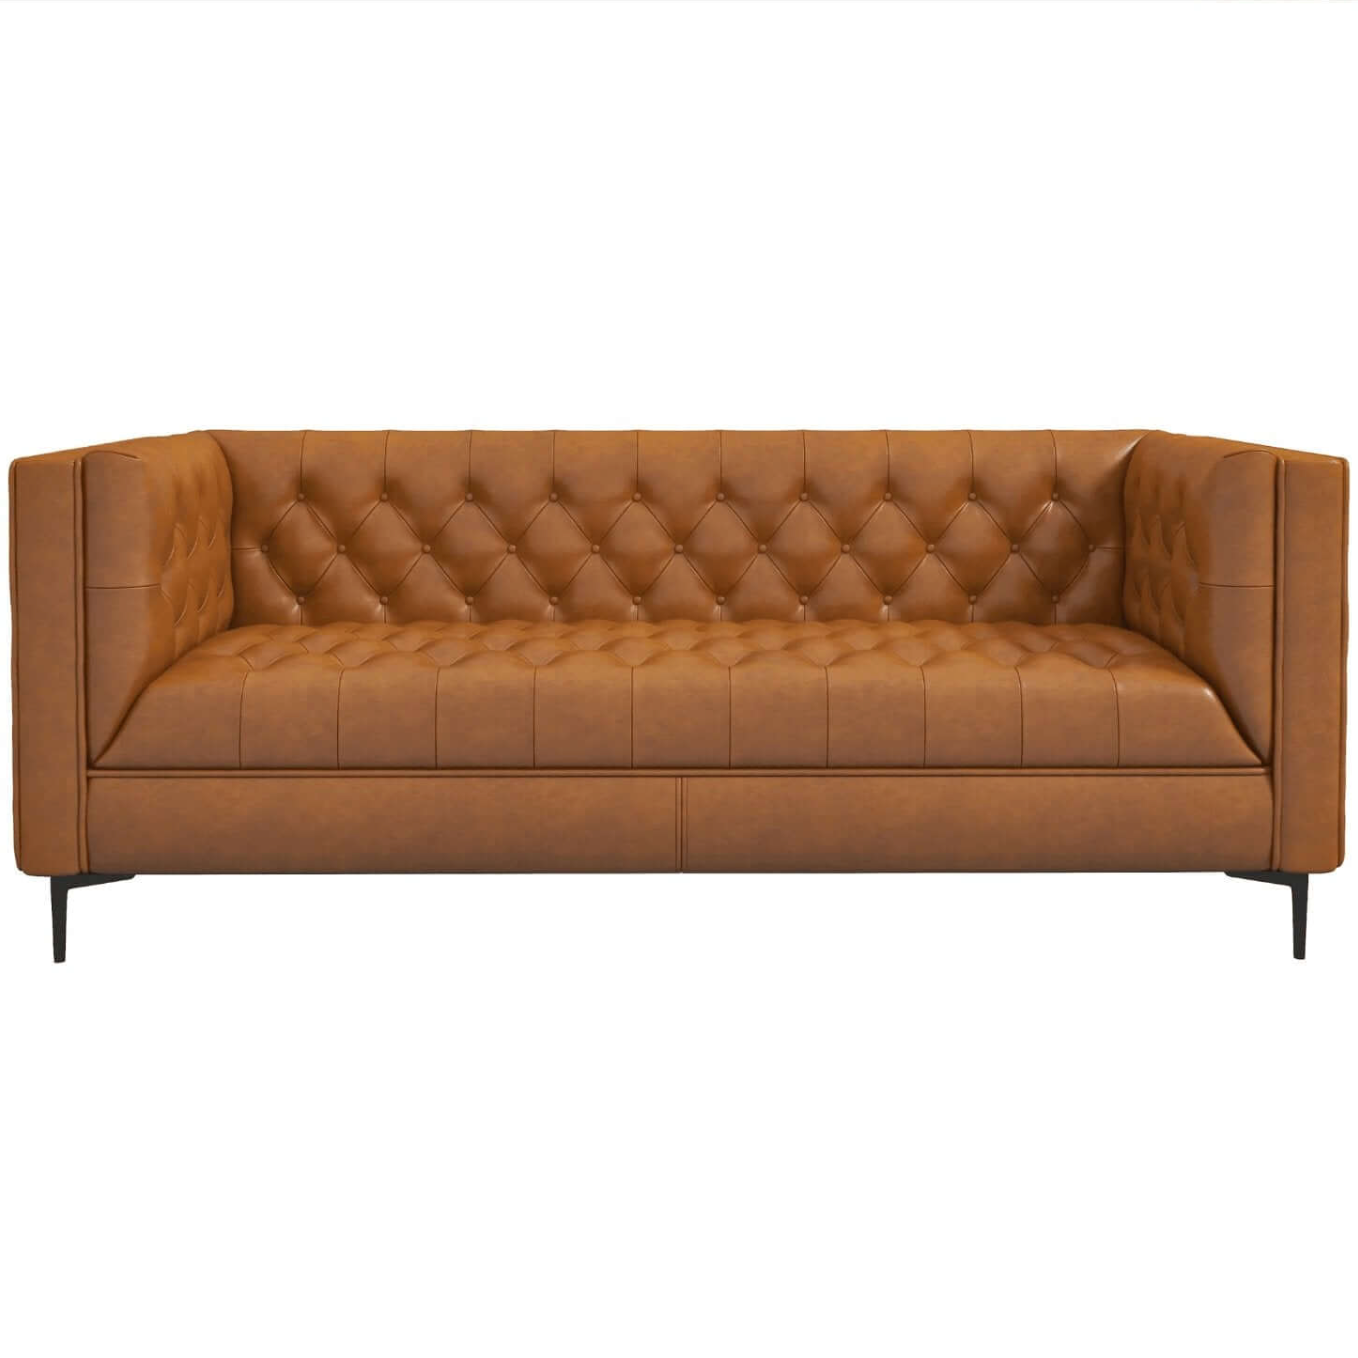 Evelyn MCM Tufted Chesterfield Sofa 88"